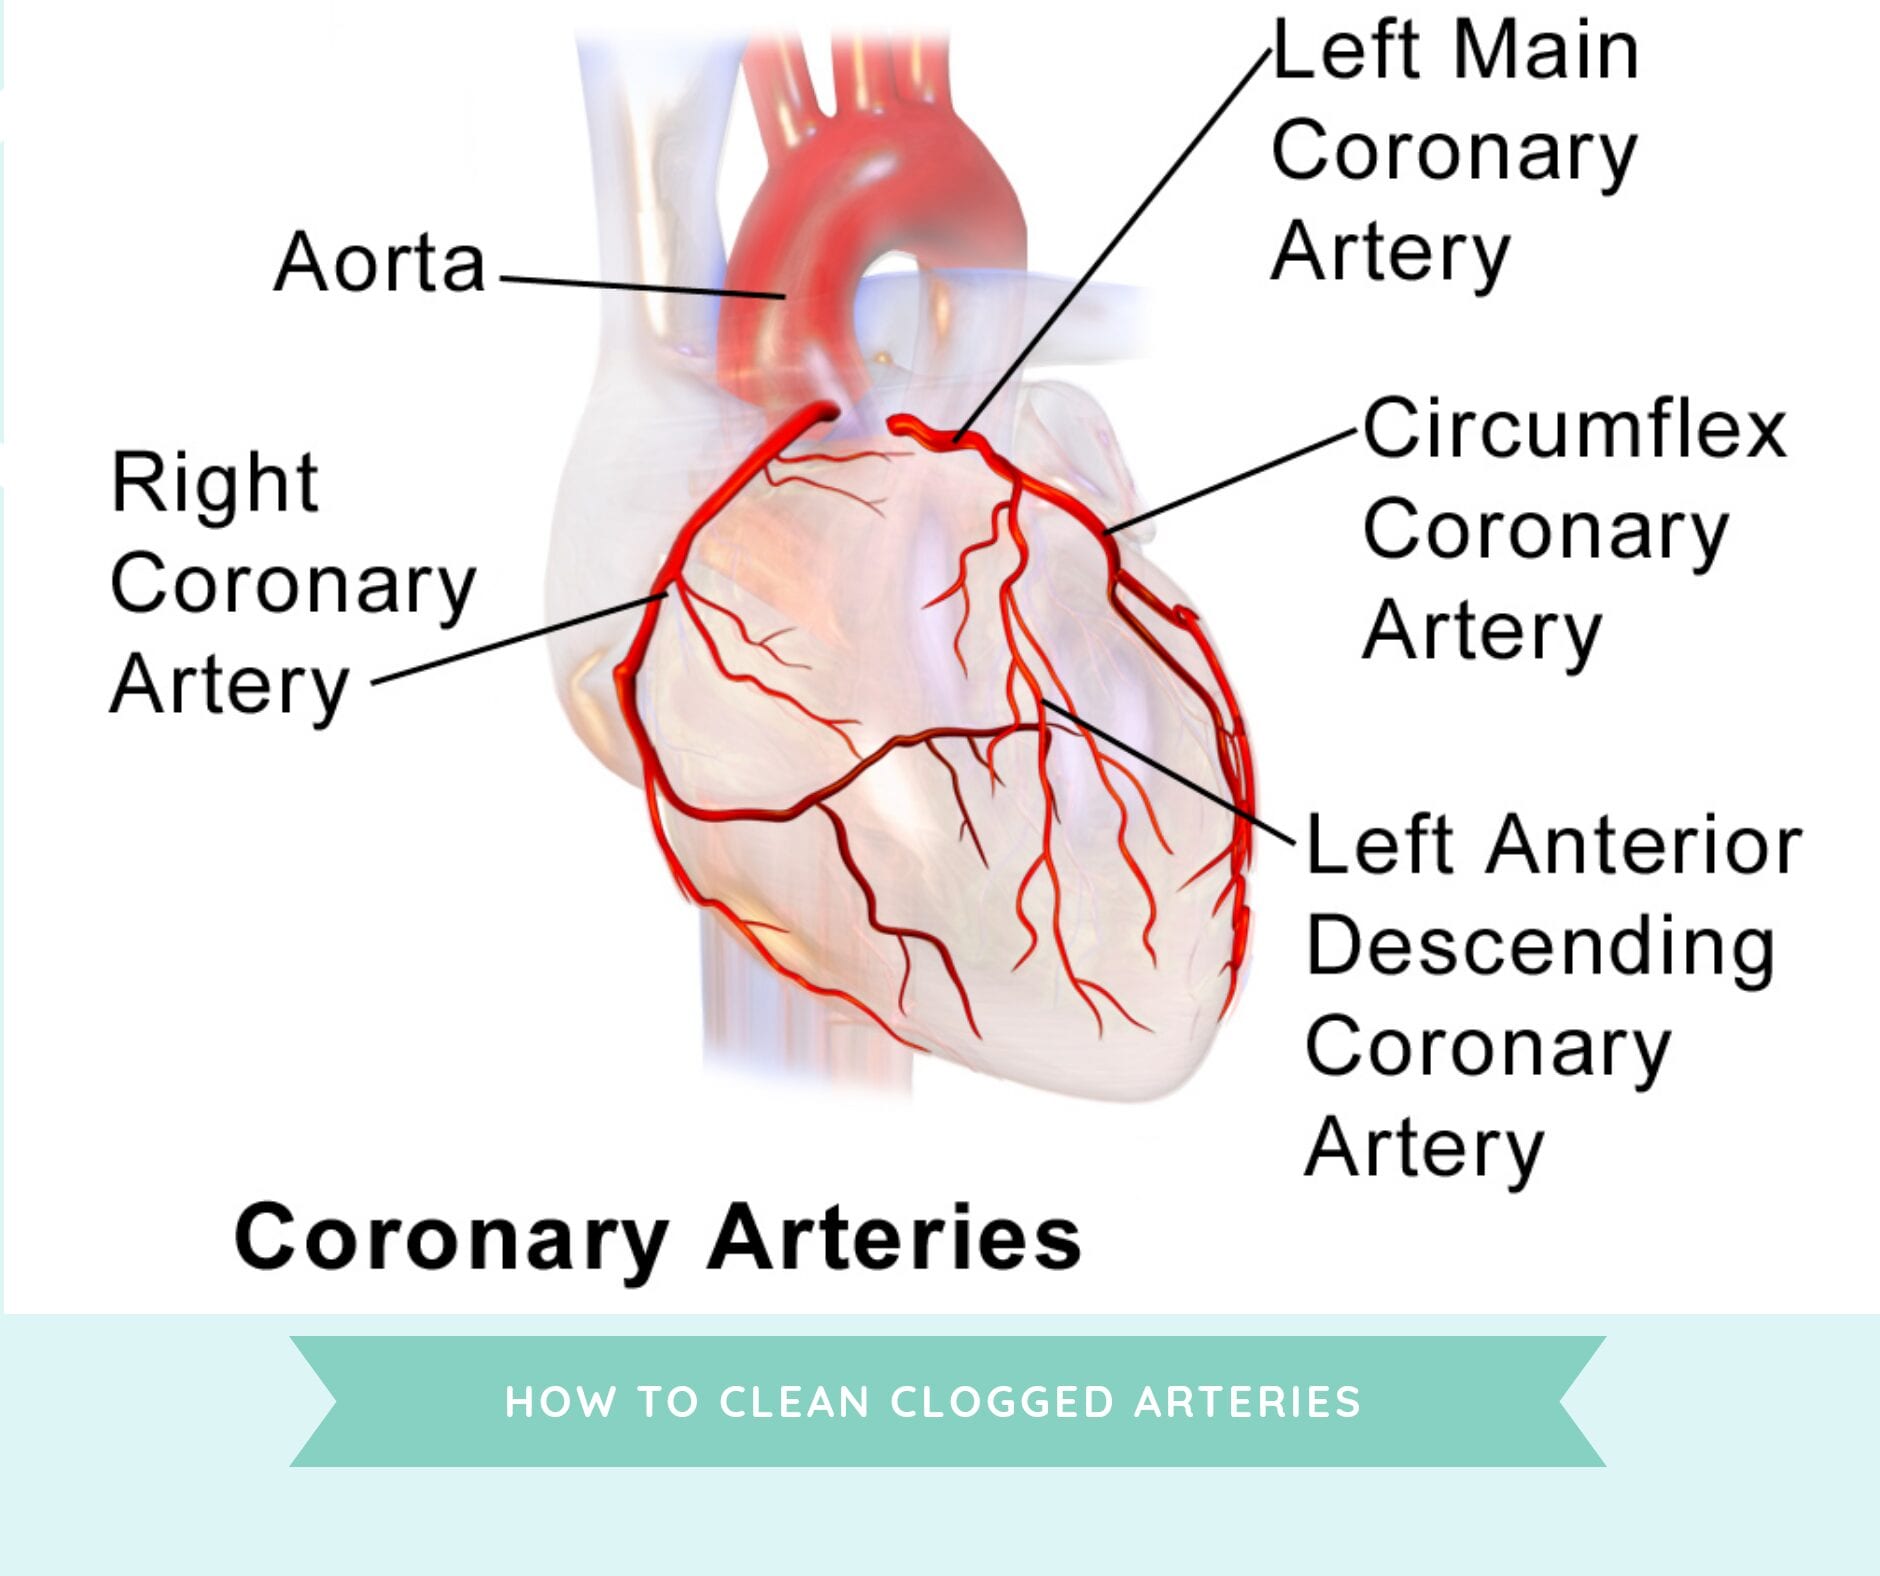 How to clean clogged arteries